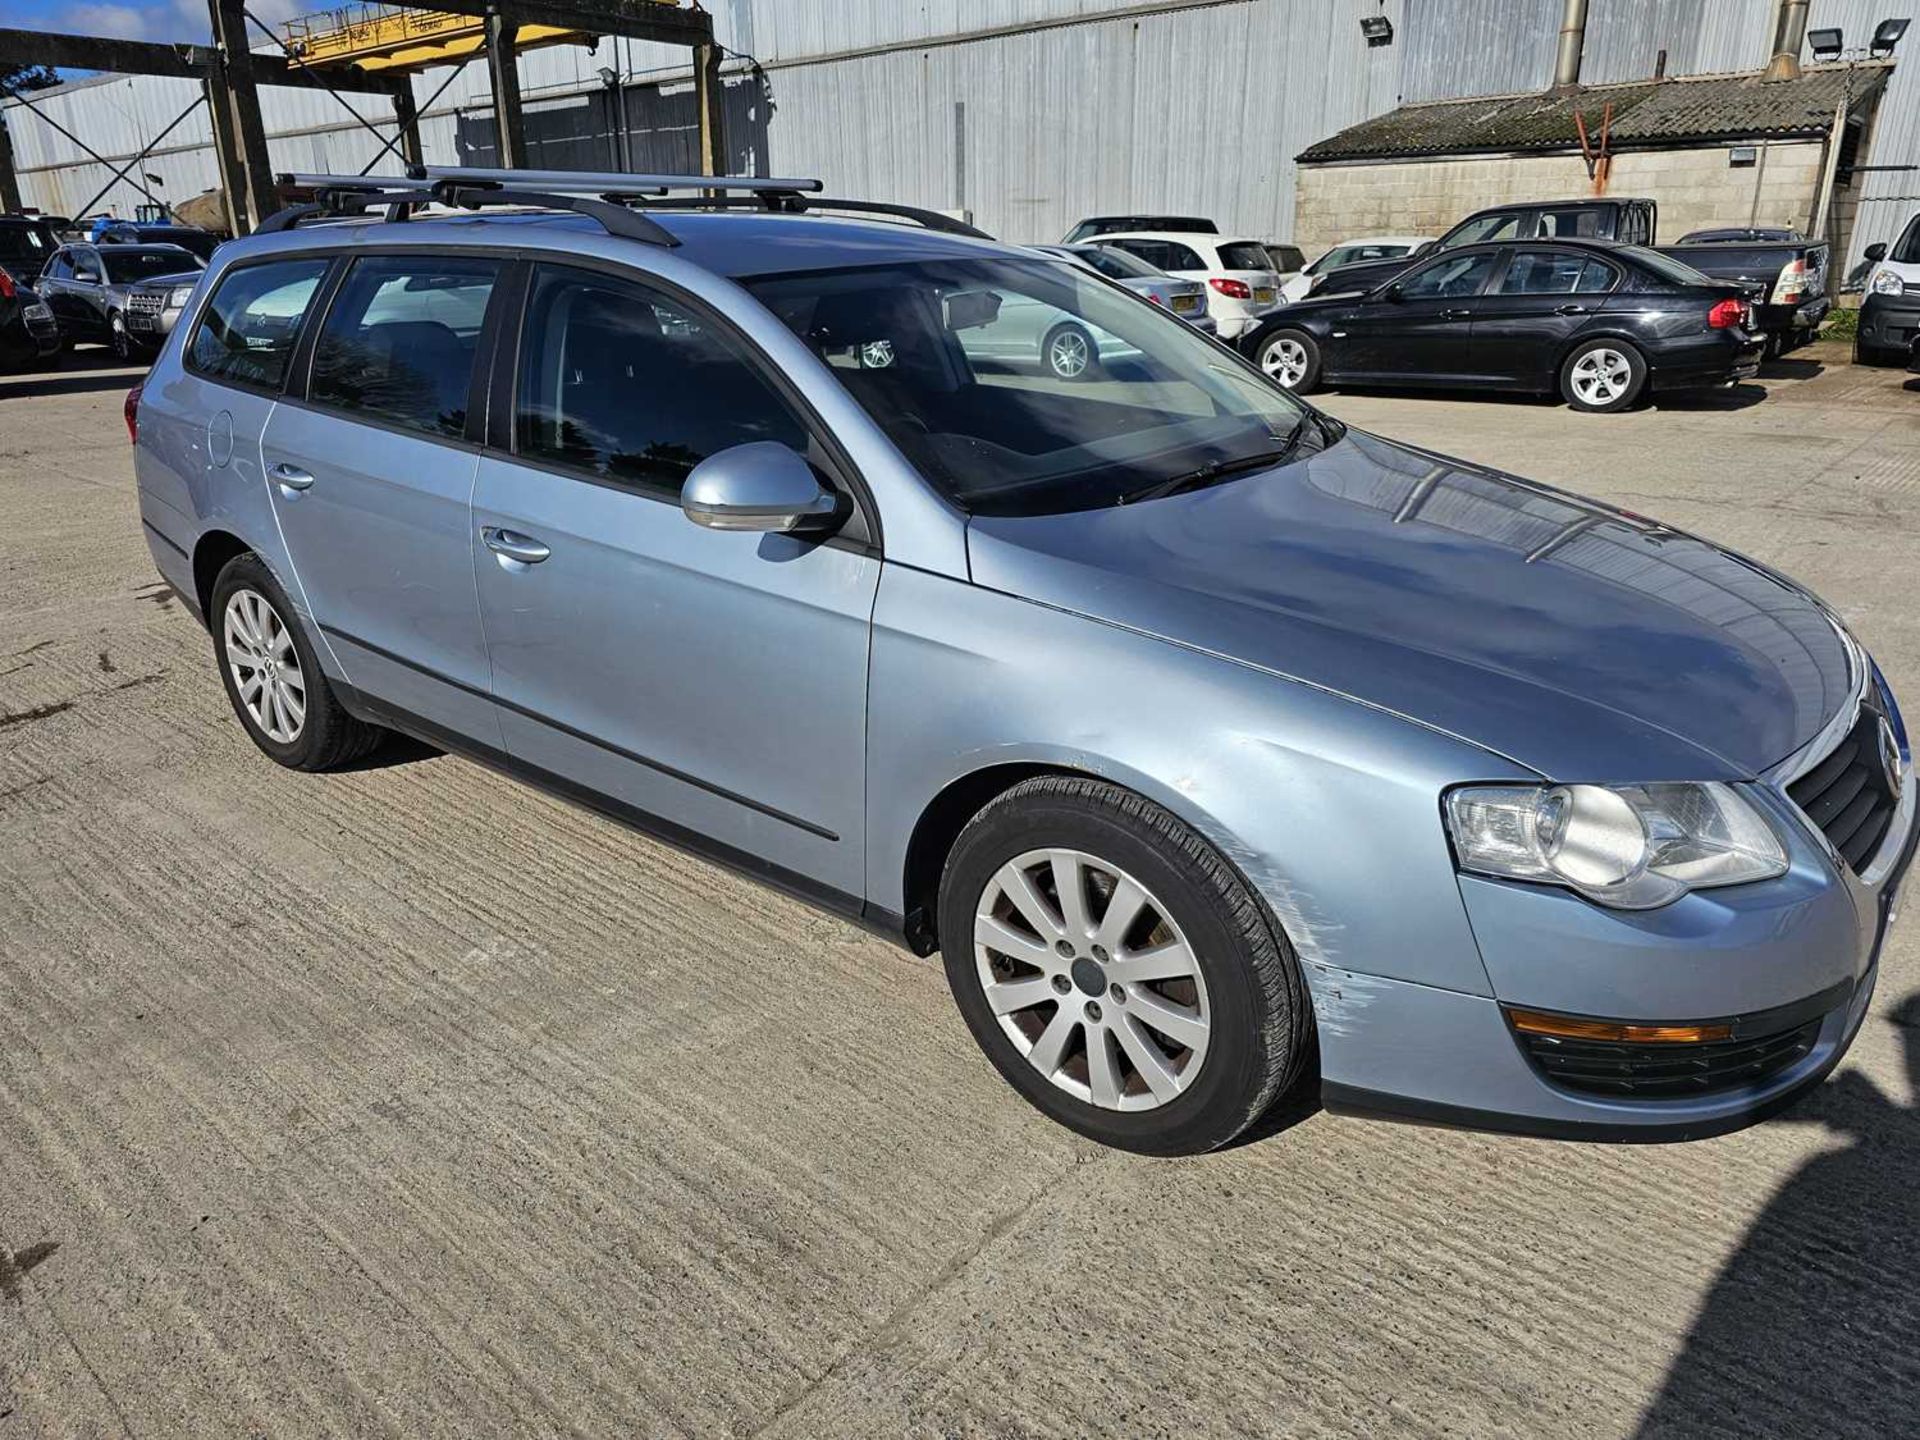 2008 Volkswagen Passat 2.0 TDi Estate, Auto, A/C (Reg. Docs. Available, Tested 10/24) - Image 7 of 28